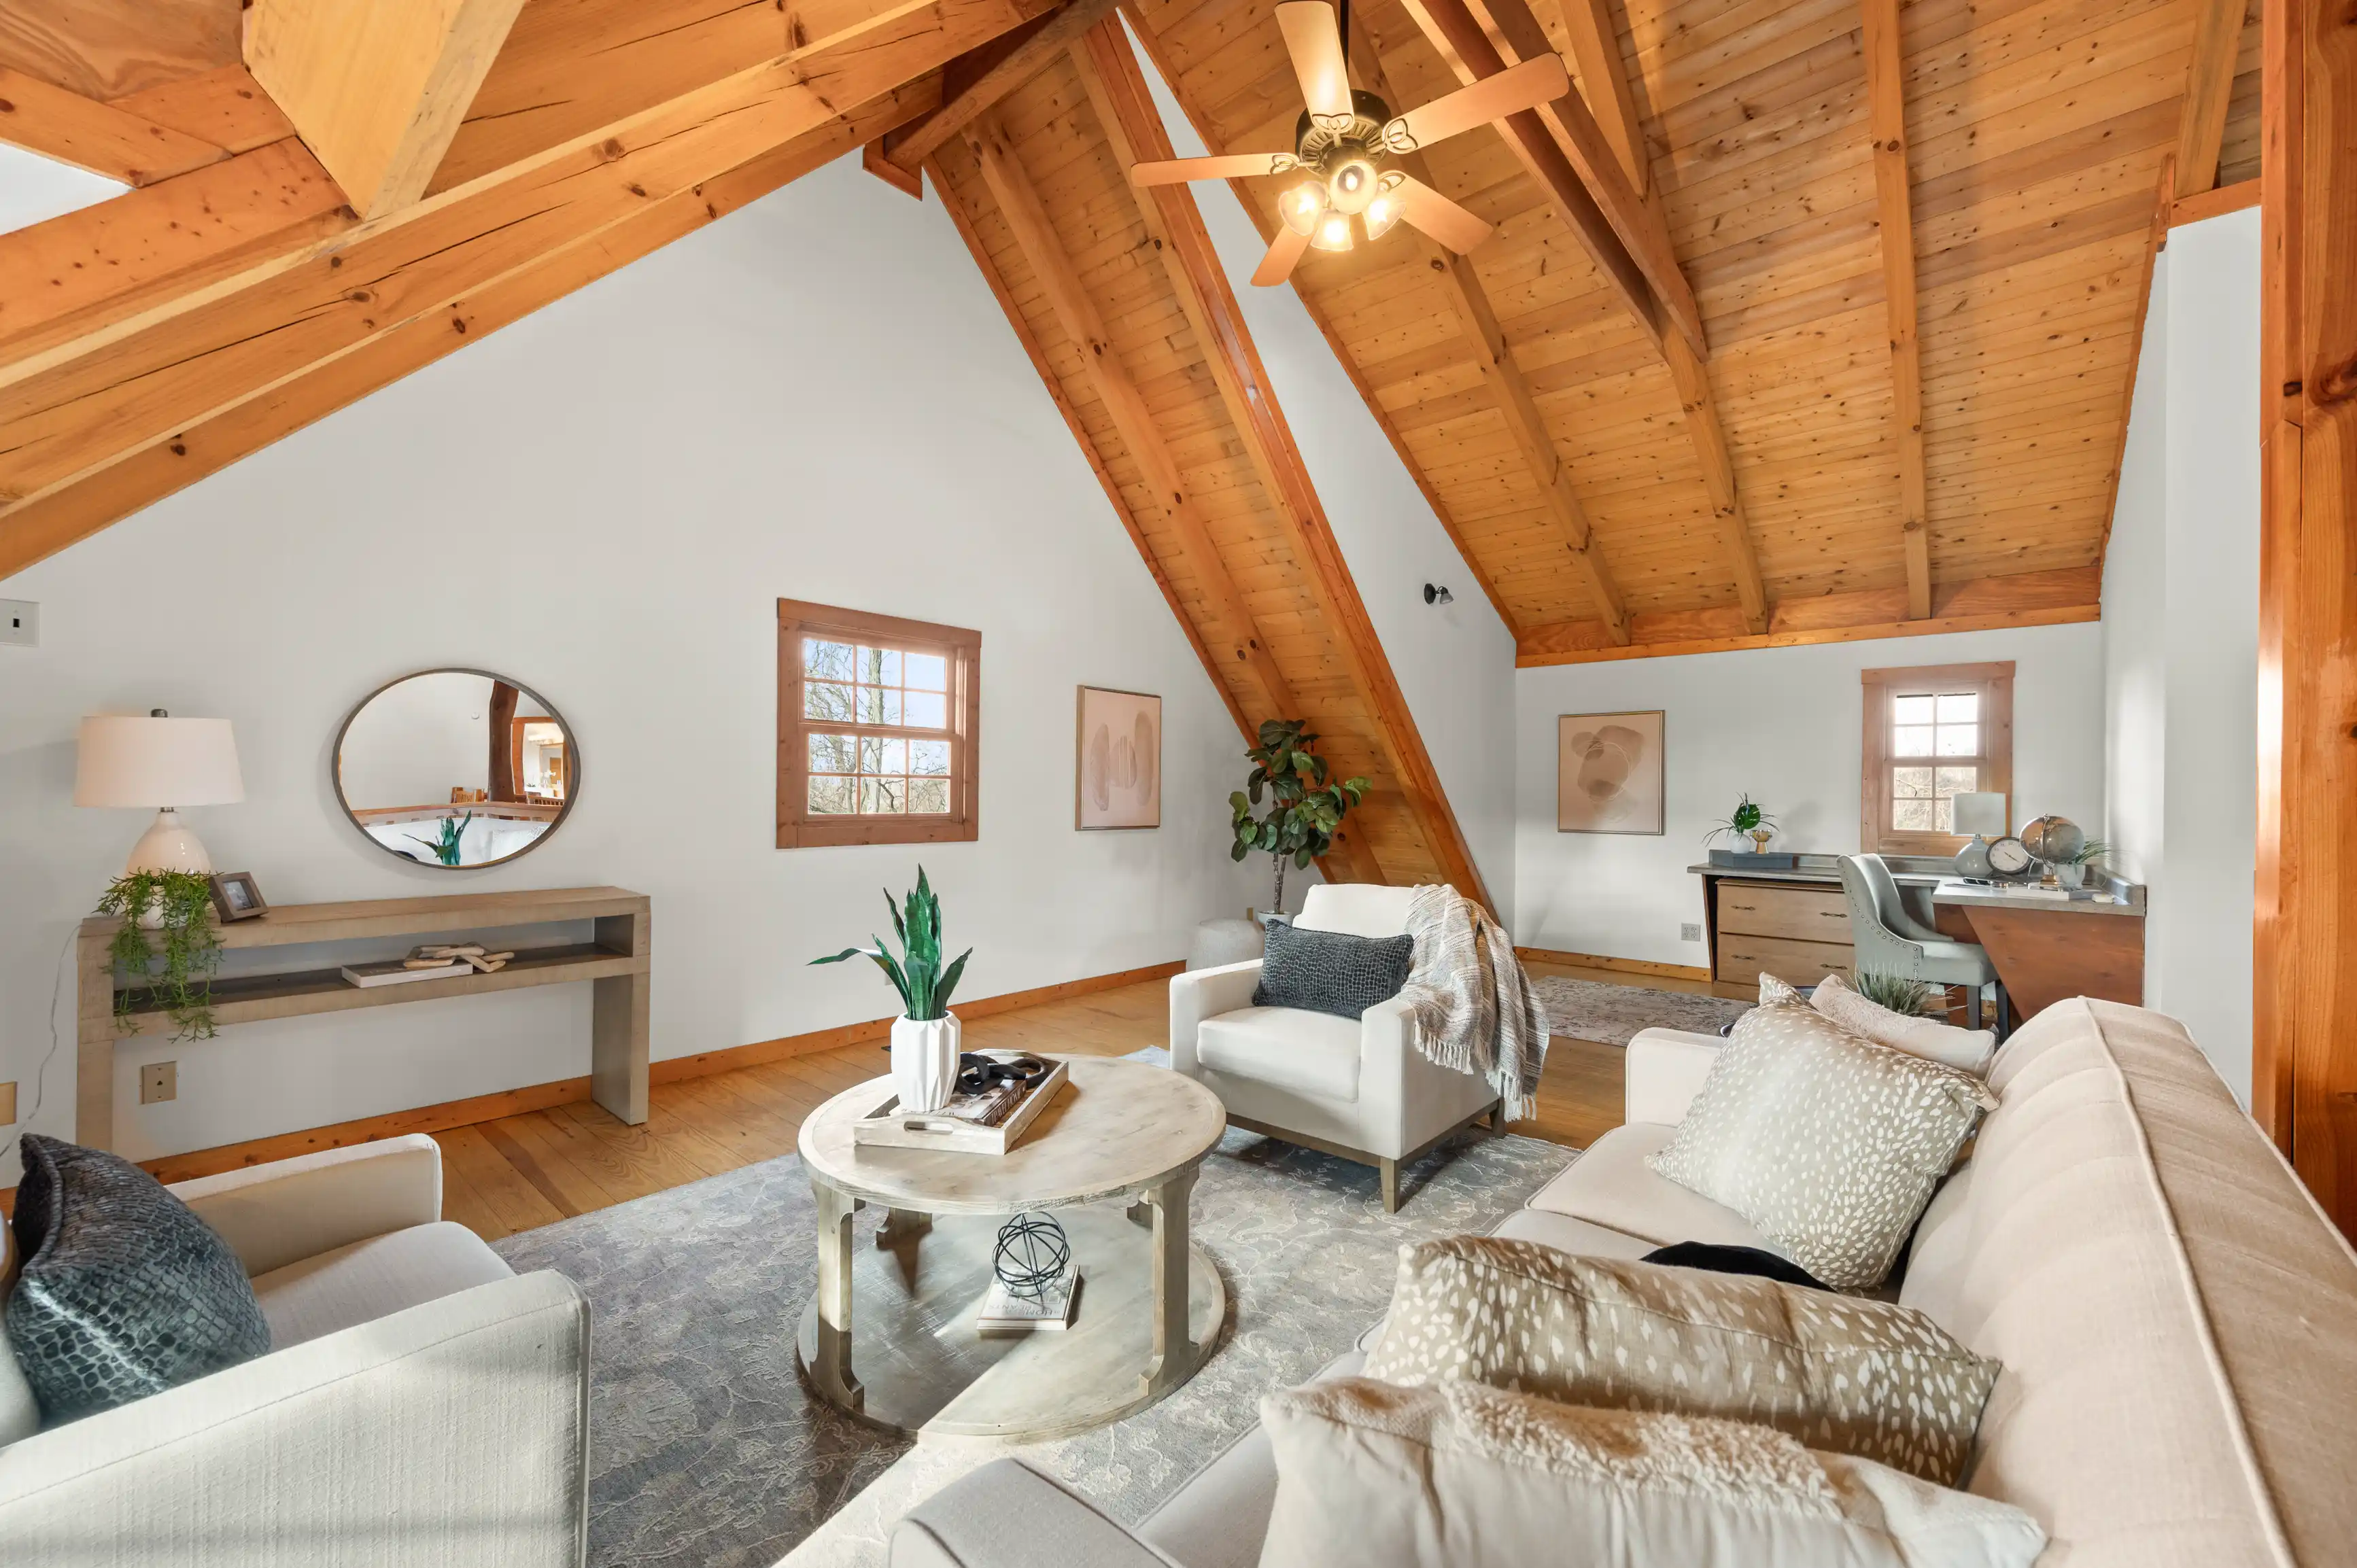 Spacious living room in a cabin with vaulted ceilings, exposed beams, hardwood floors, and a mix of modern and rustic decor.